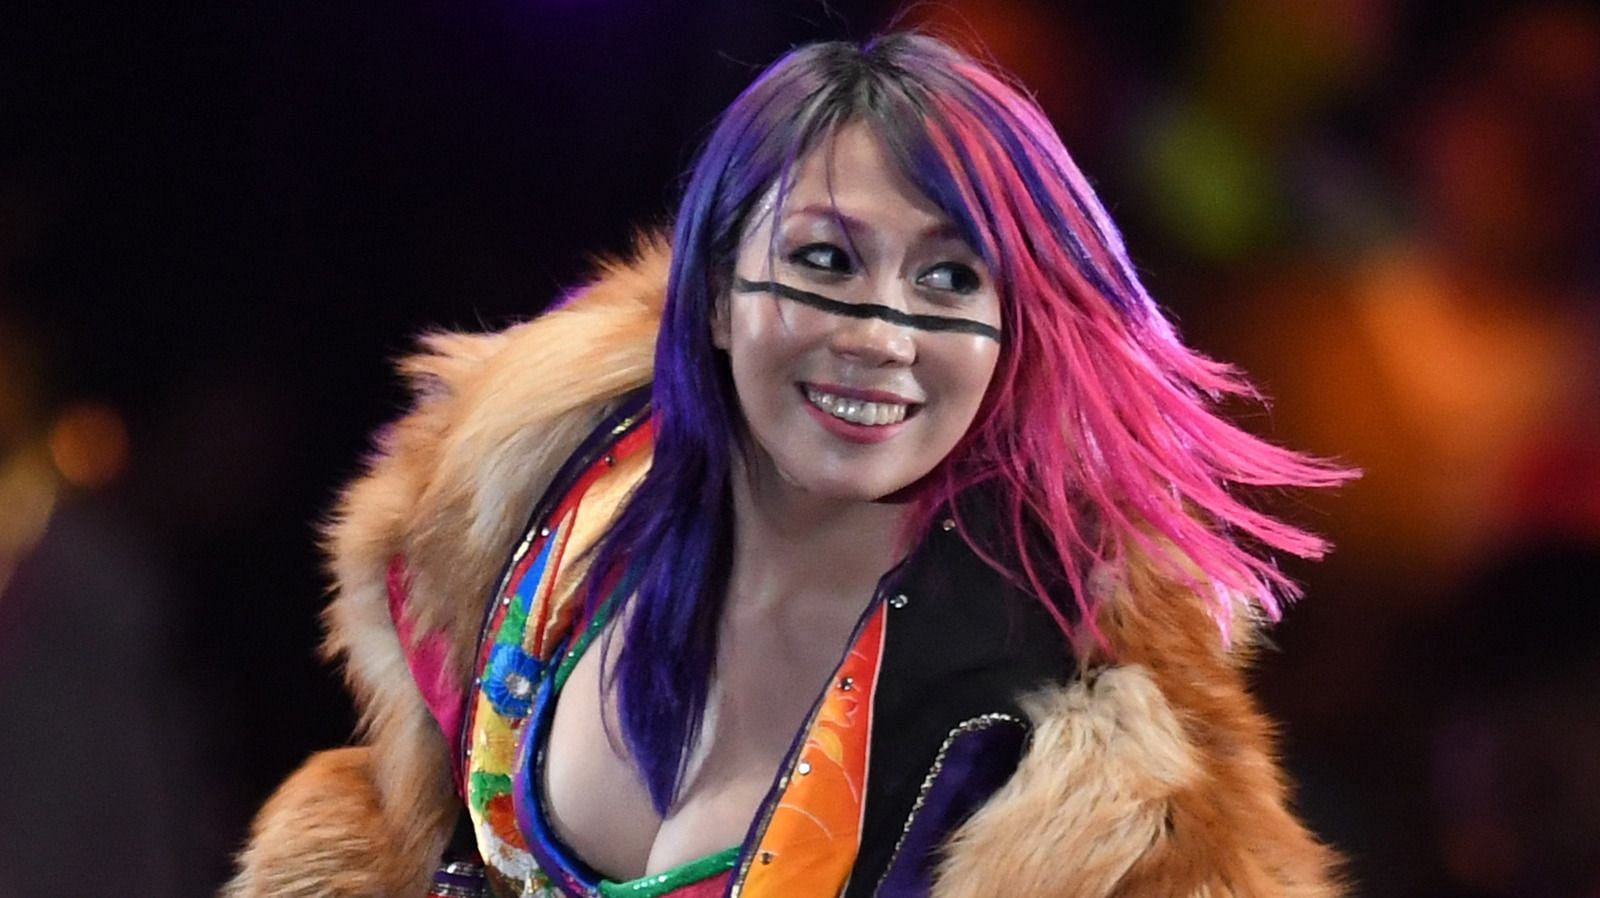 Asuka came out on the winning side at WarGames